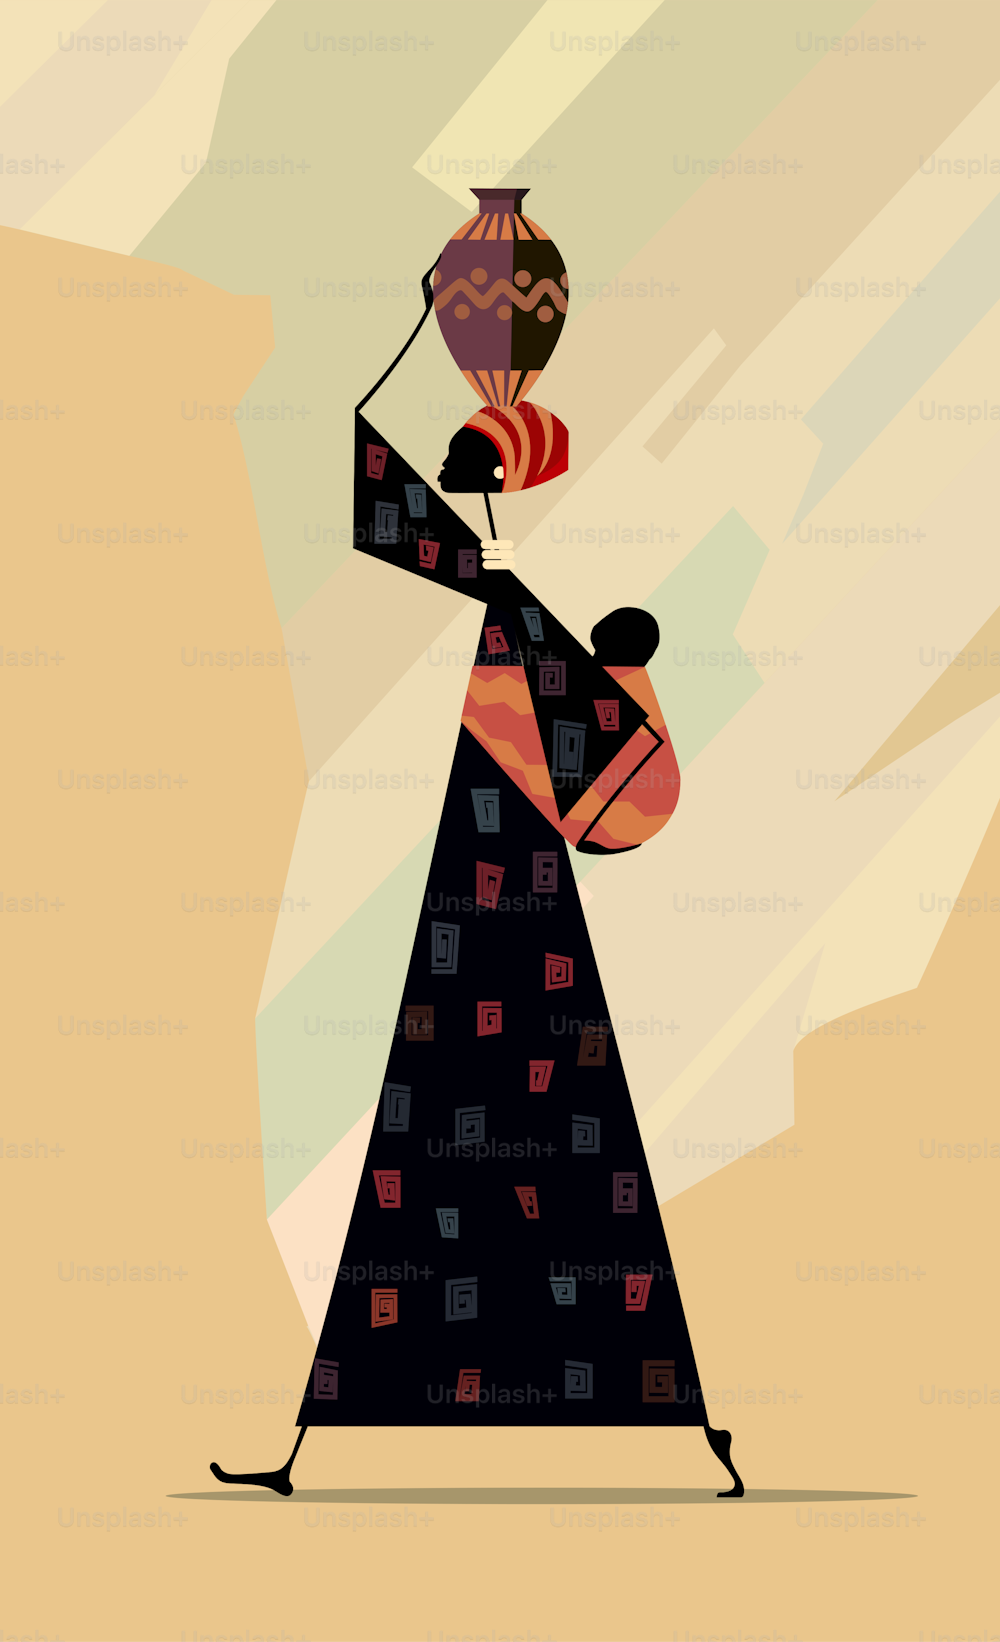 Stylized image of an African woman with a child, carrying a jug on her head